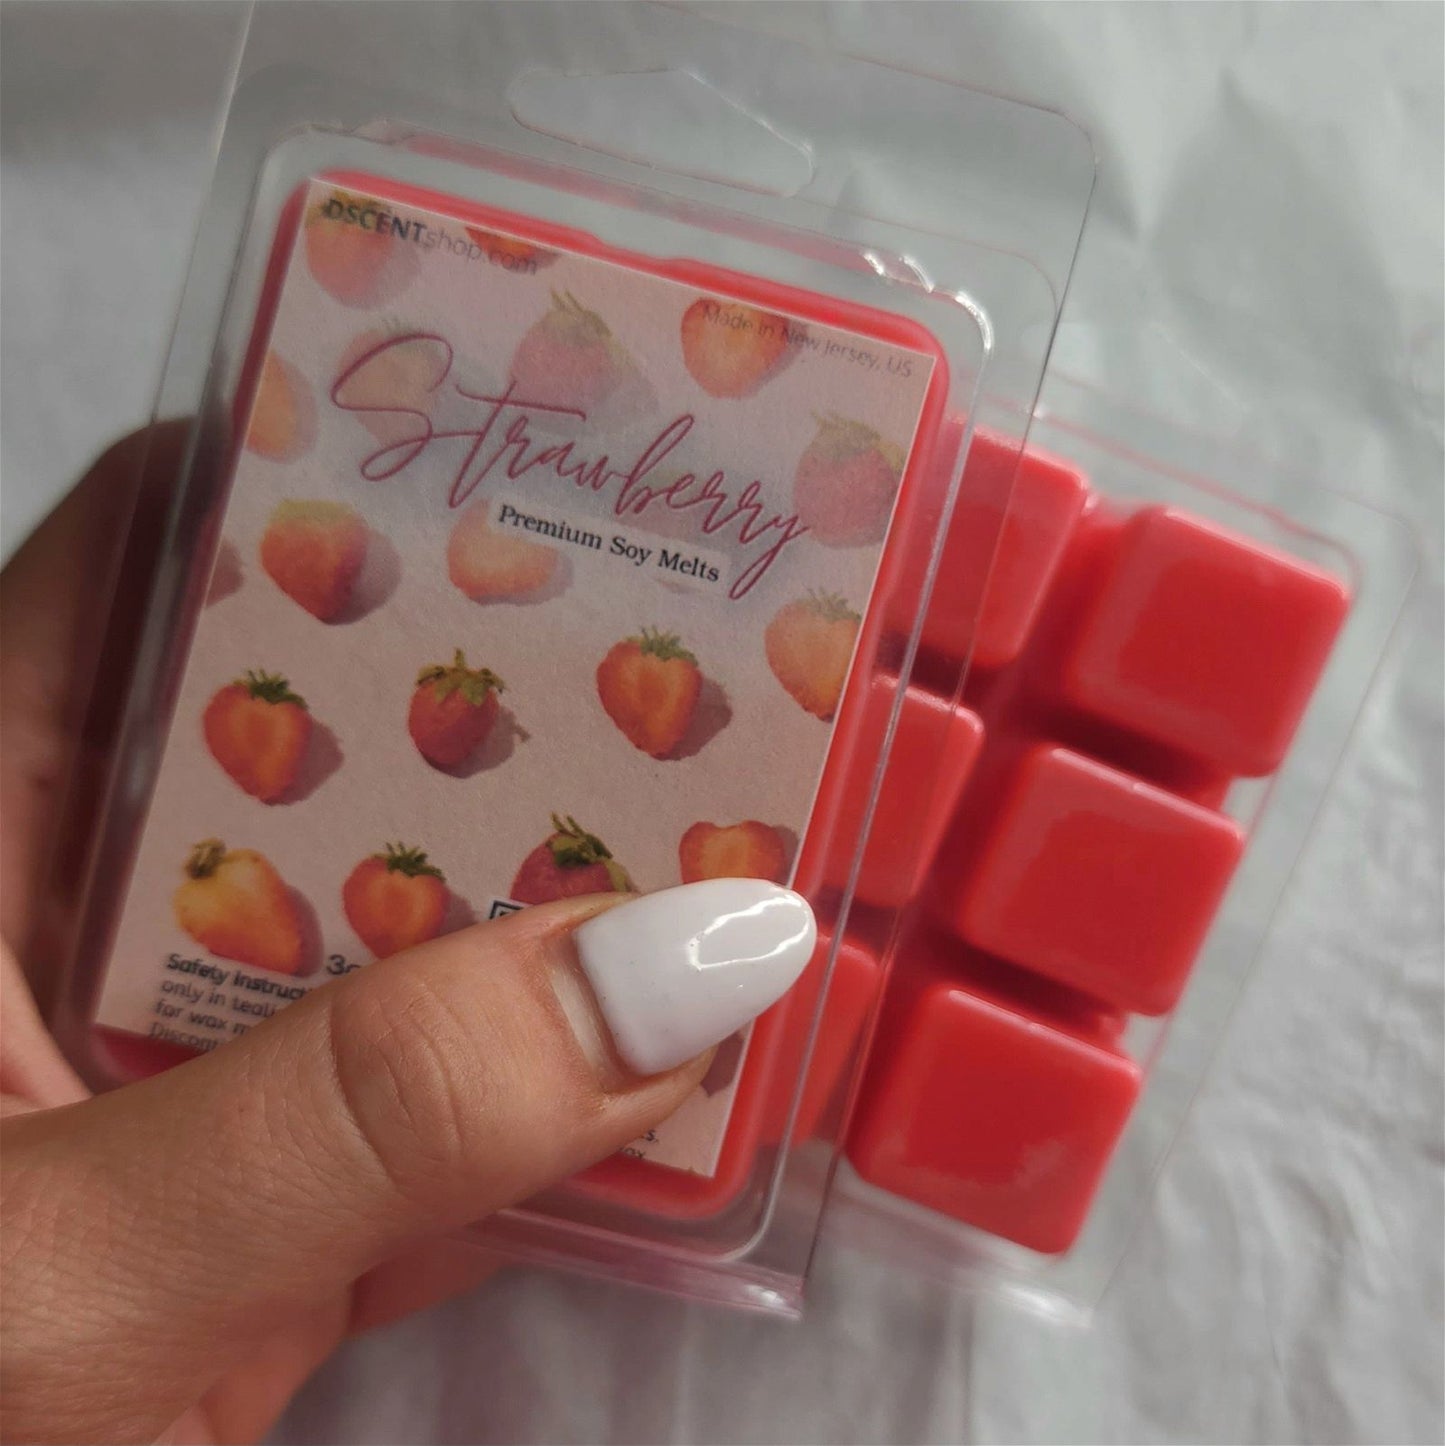 Soy Wax Melts | Clamshell and Boxes - D SCENT 